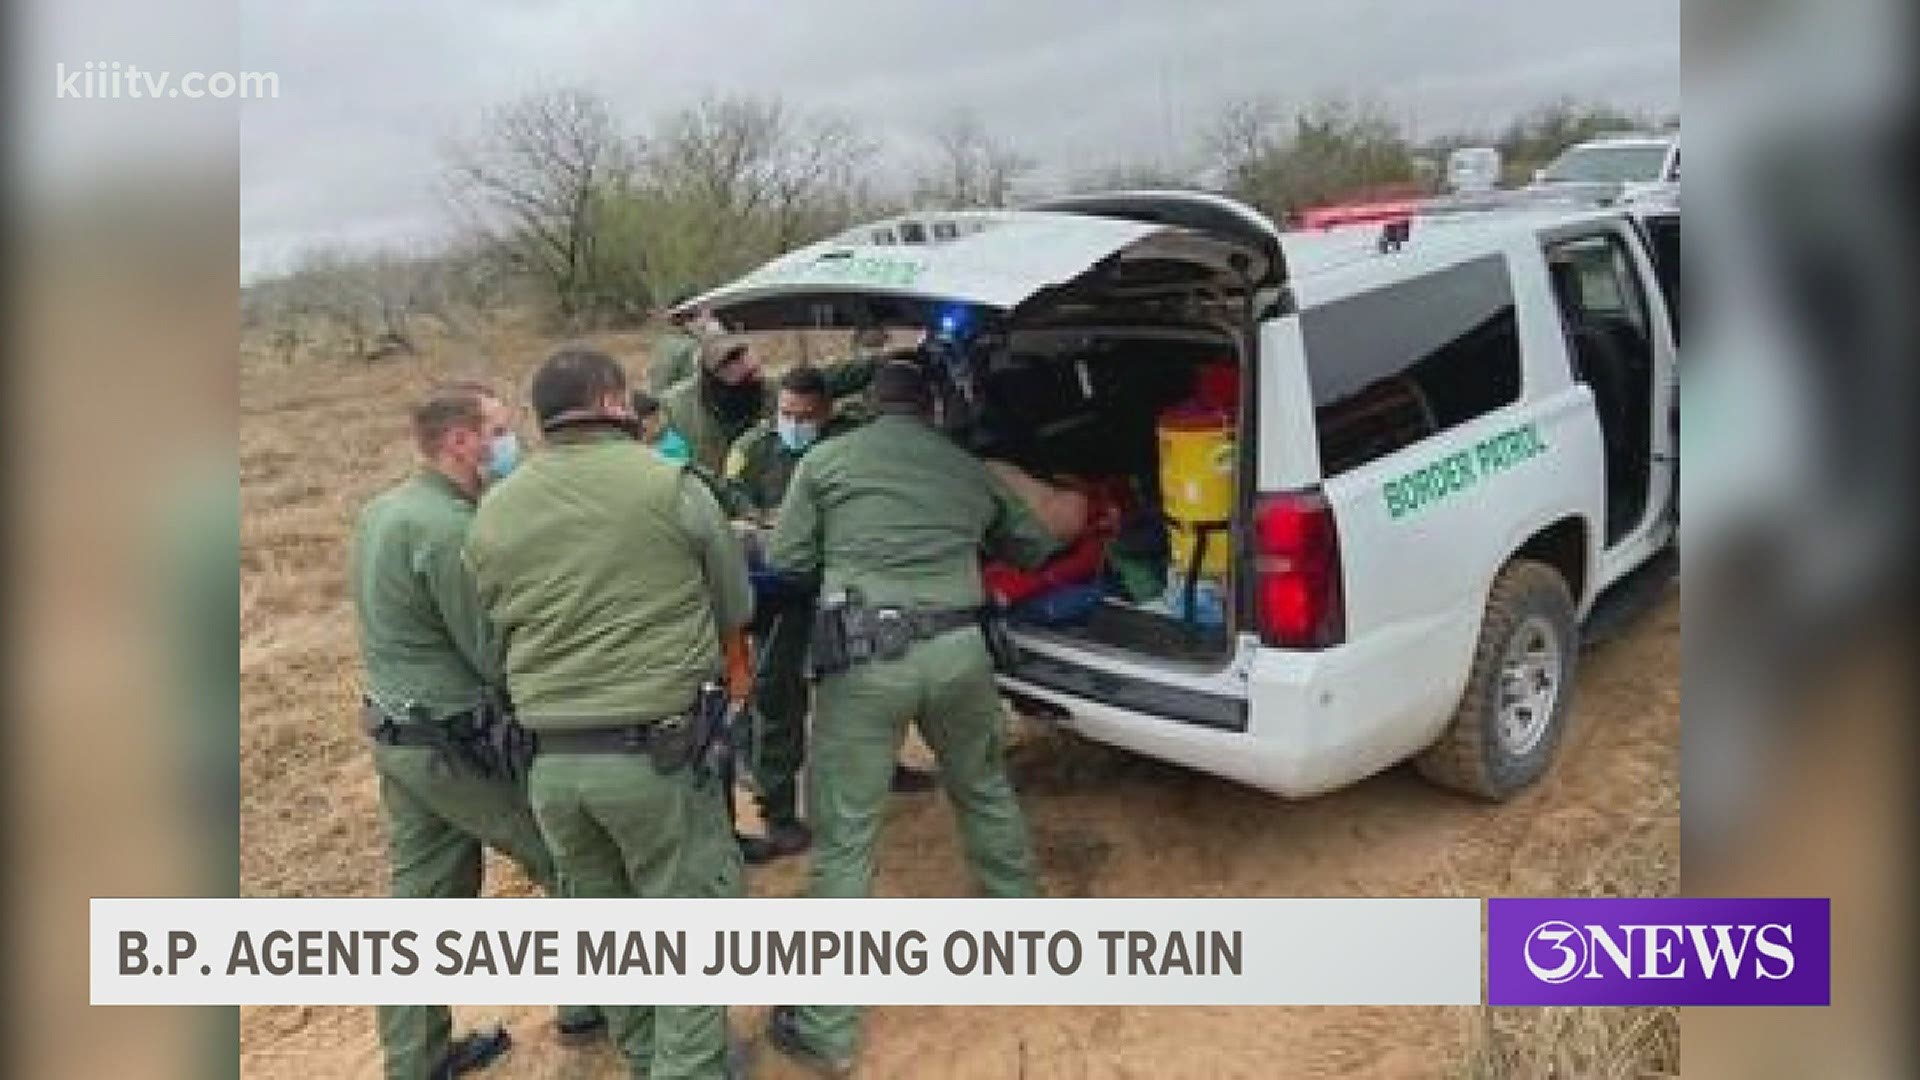 The man was found to be a resident of Mexico and in the country illegally, officials said.